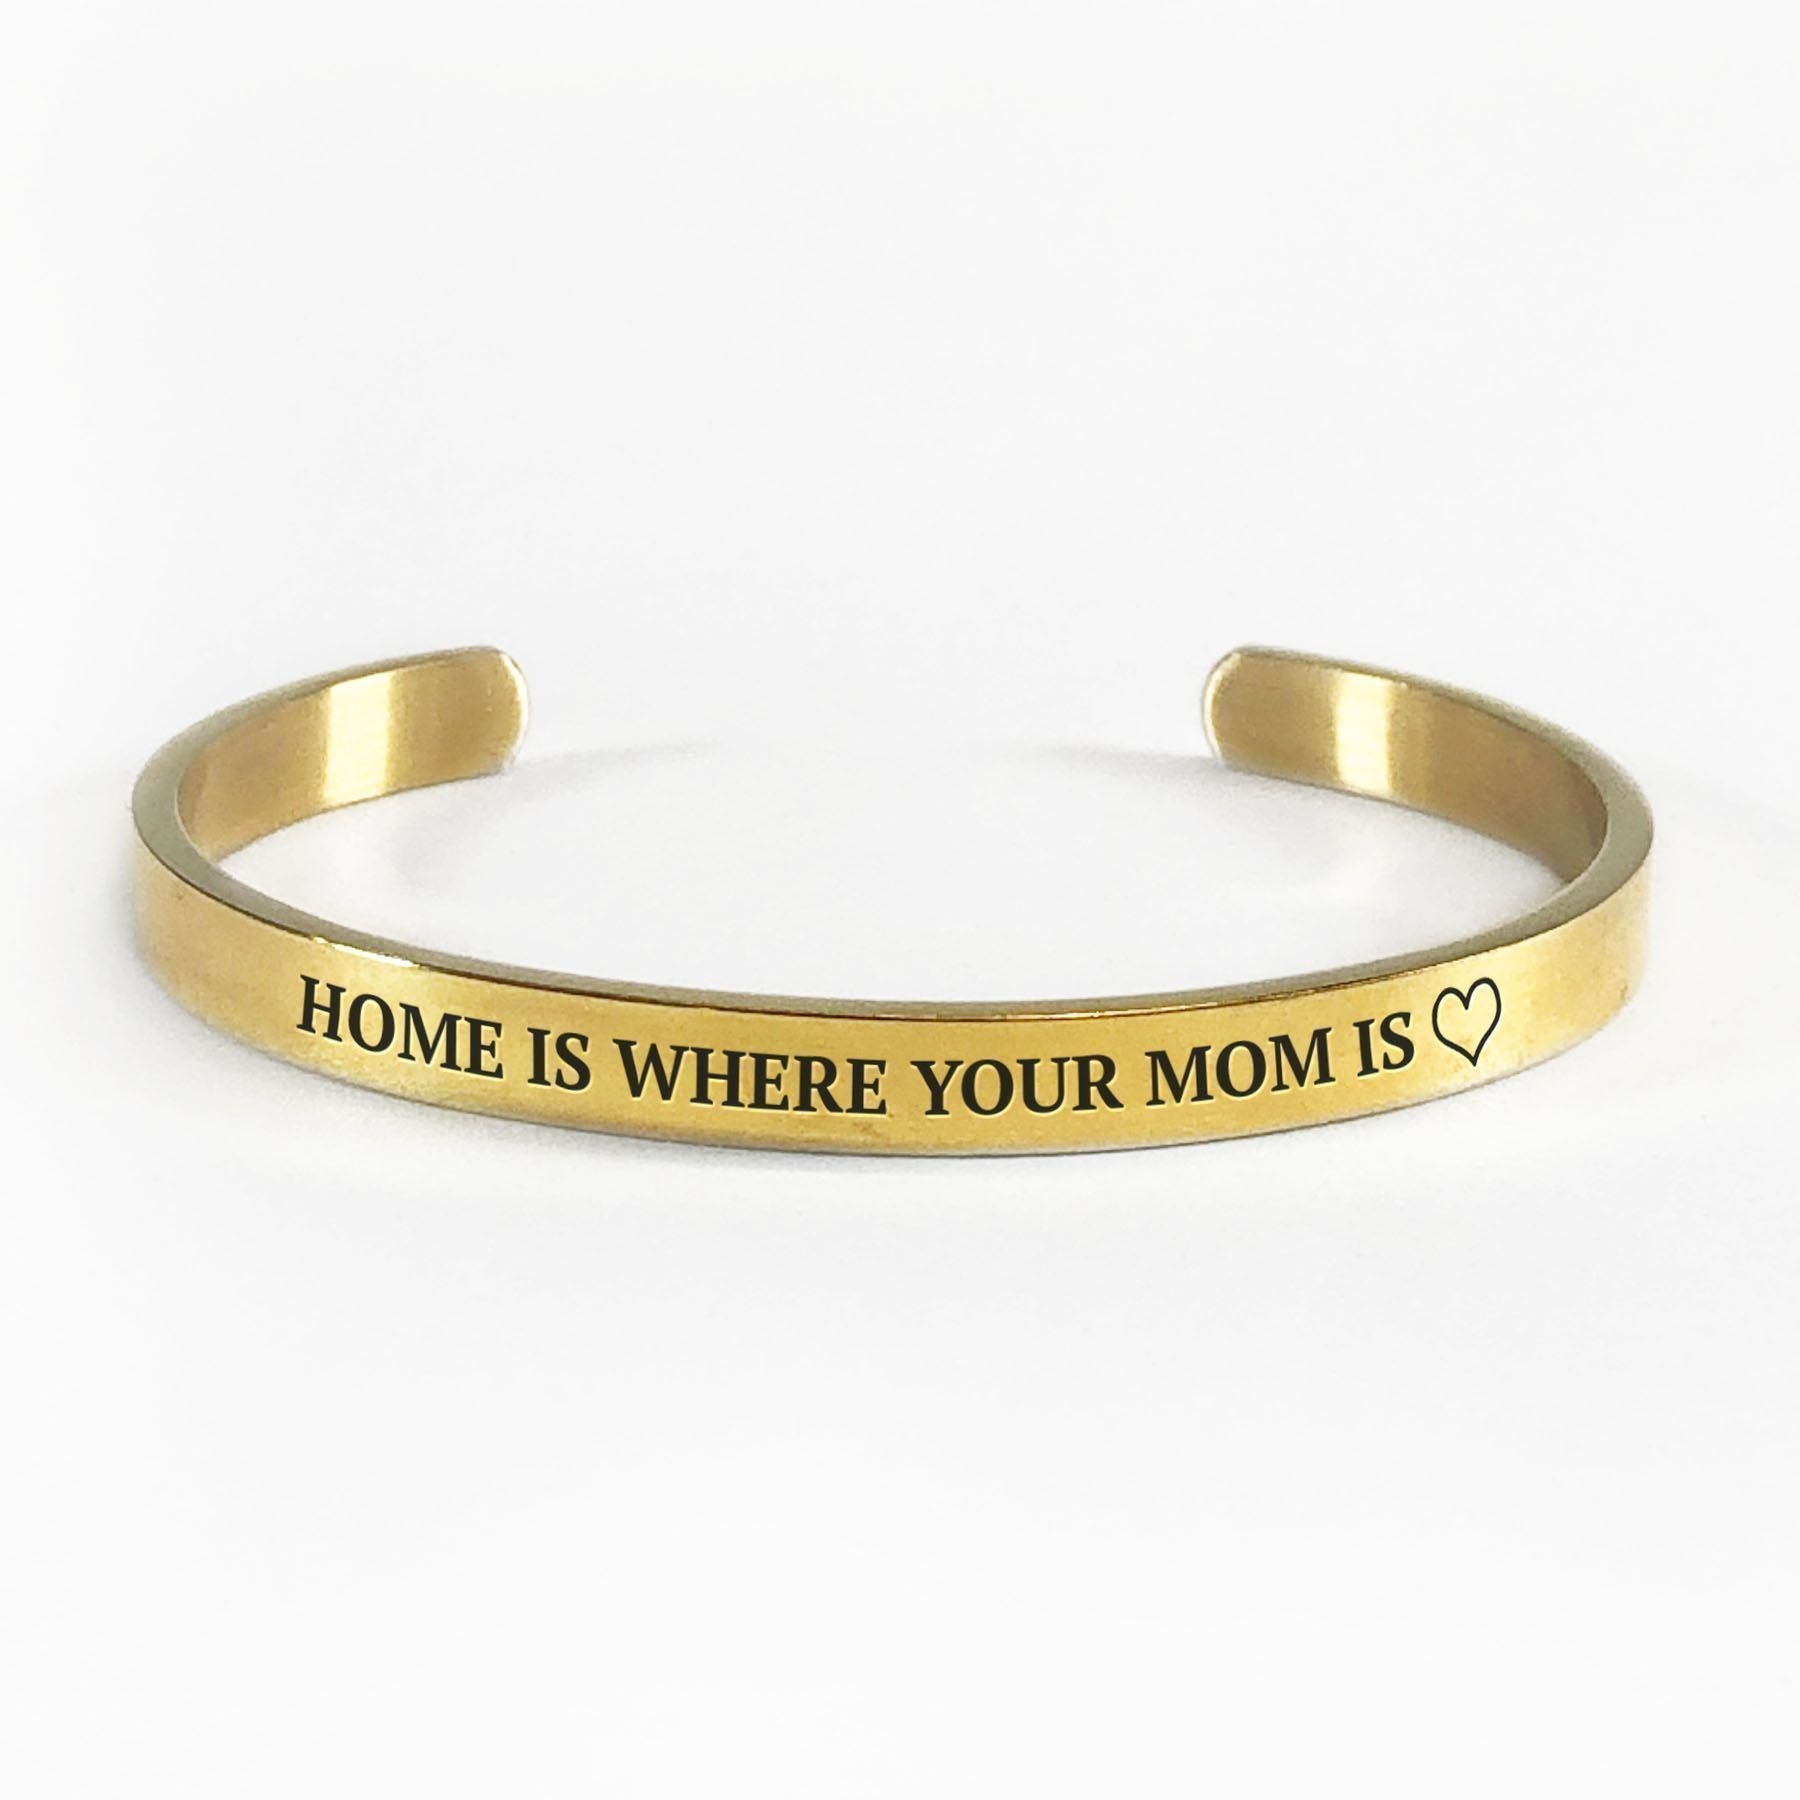 Home is where your mom is bracelet with gold plating